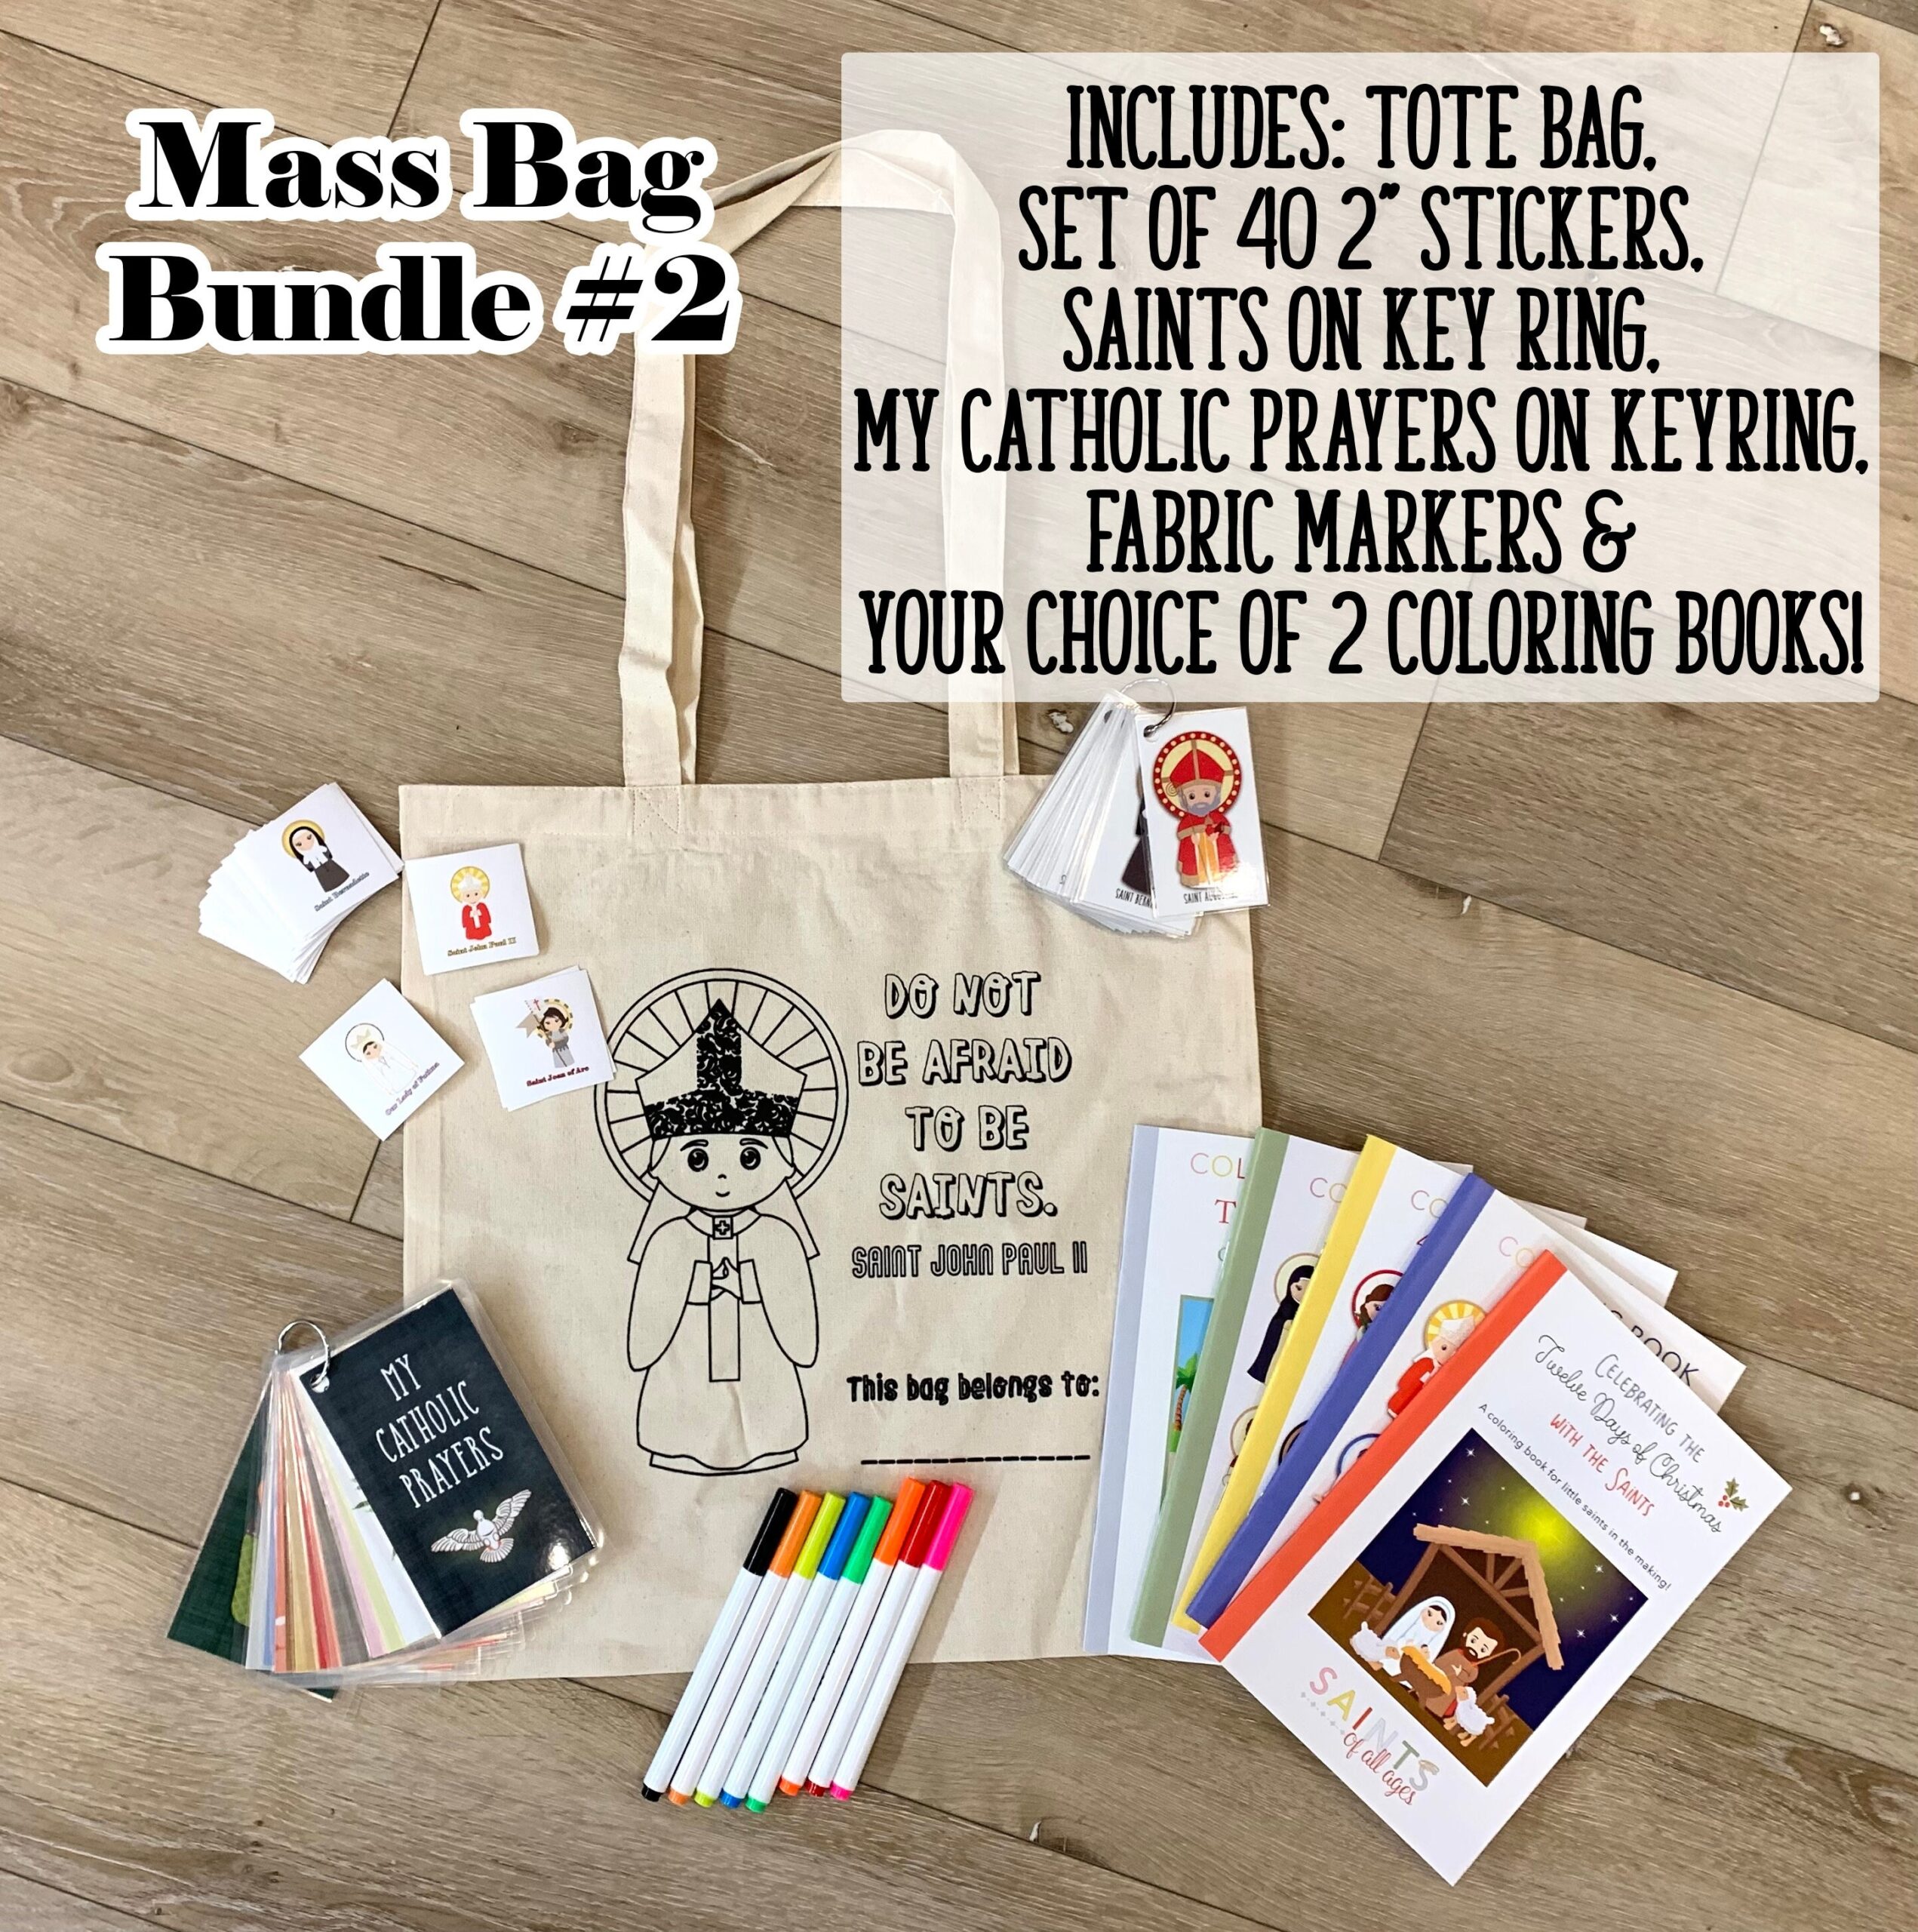 Mass Bag 2 With Kids Coloring Tote Bag Toddler Mass Bag With Coloring Books And Stickers Canvas Bag Catholic Mass Kids Church Bag Etsy - Free Printable Catholic Mass Book